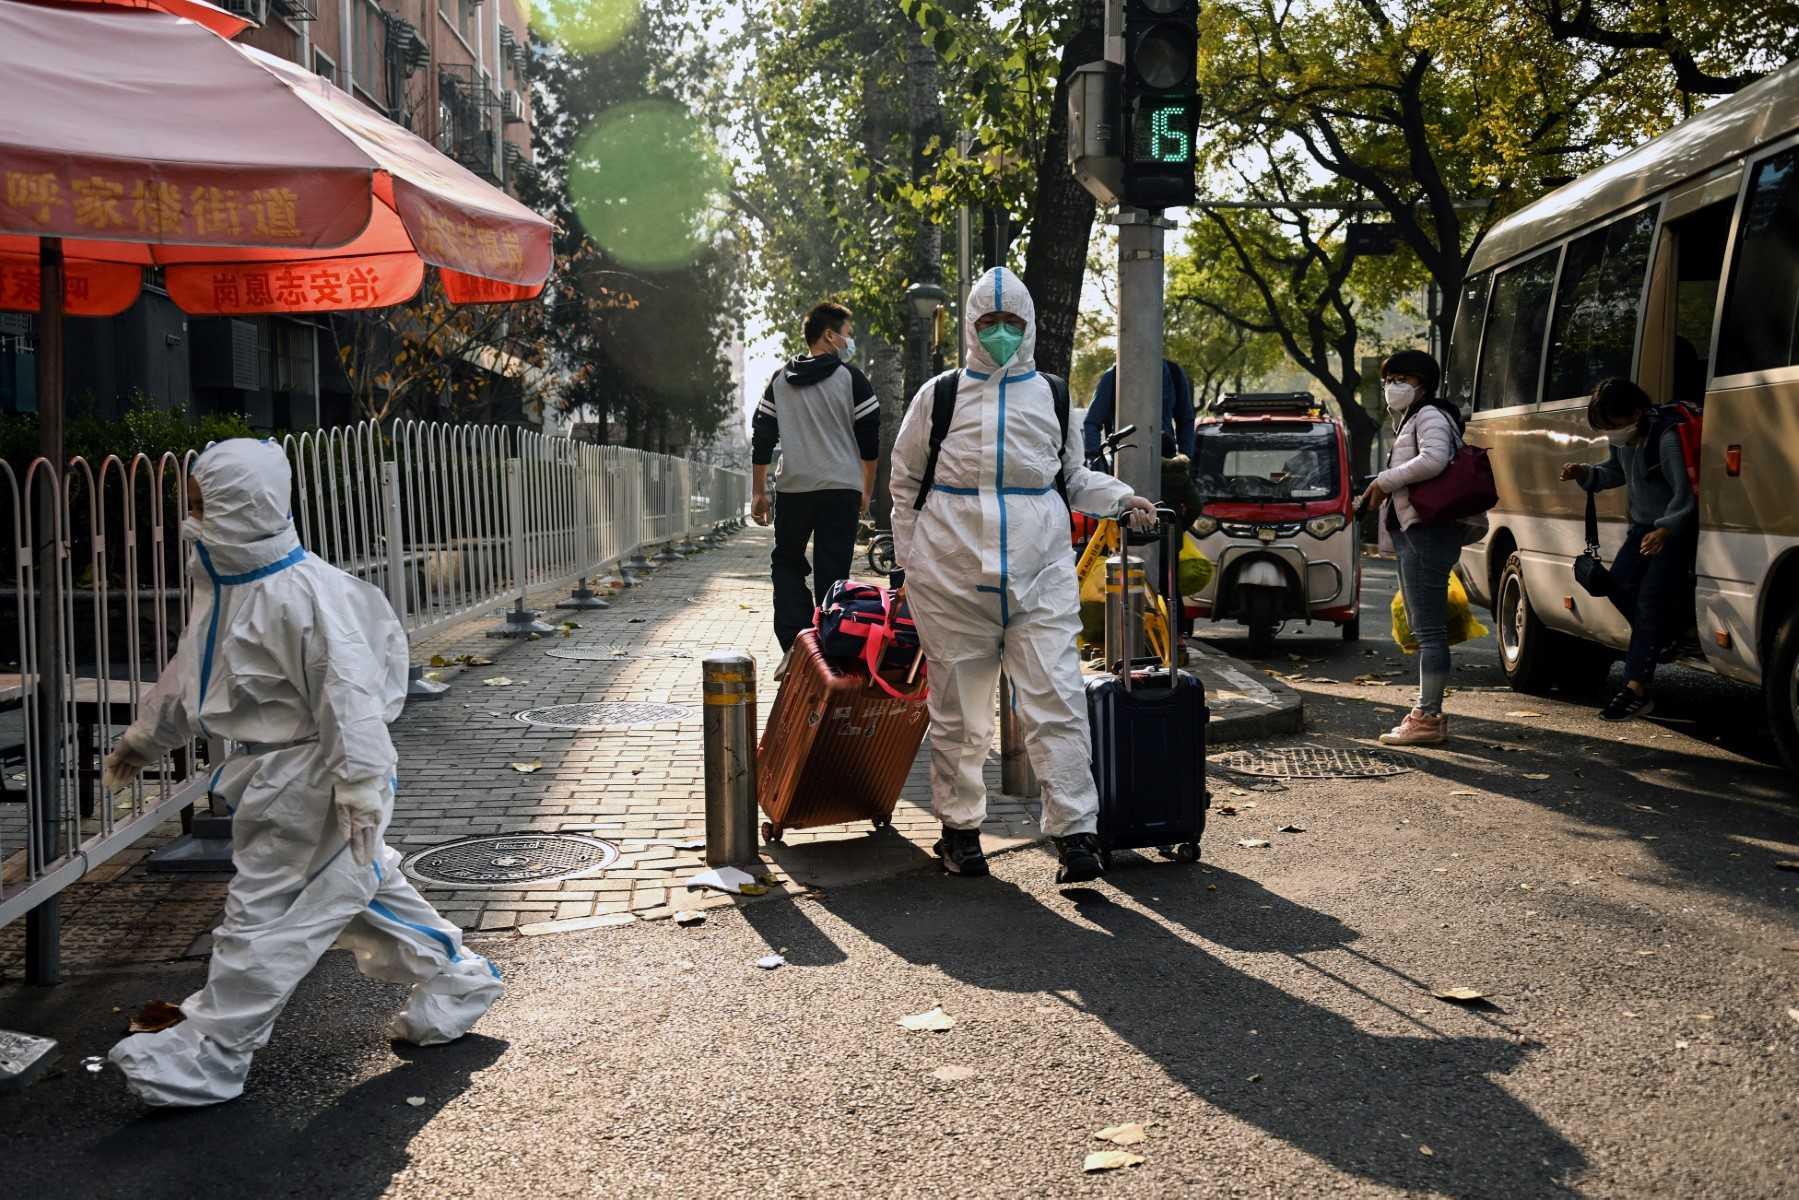 People wearing personal protective equipment walk along a street in Beijing on Nov 23, amid a lockdown due to Covid-19 coronavirus restrictions. Photo: AFP 